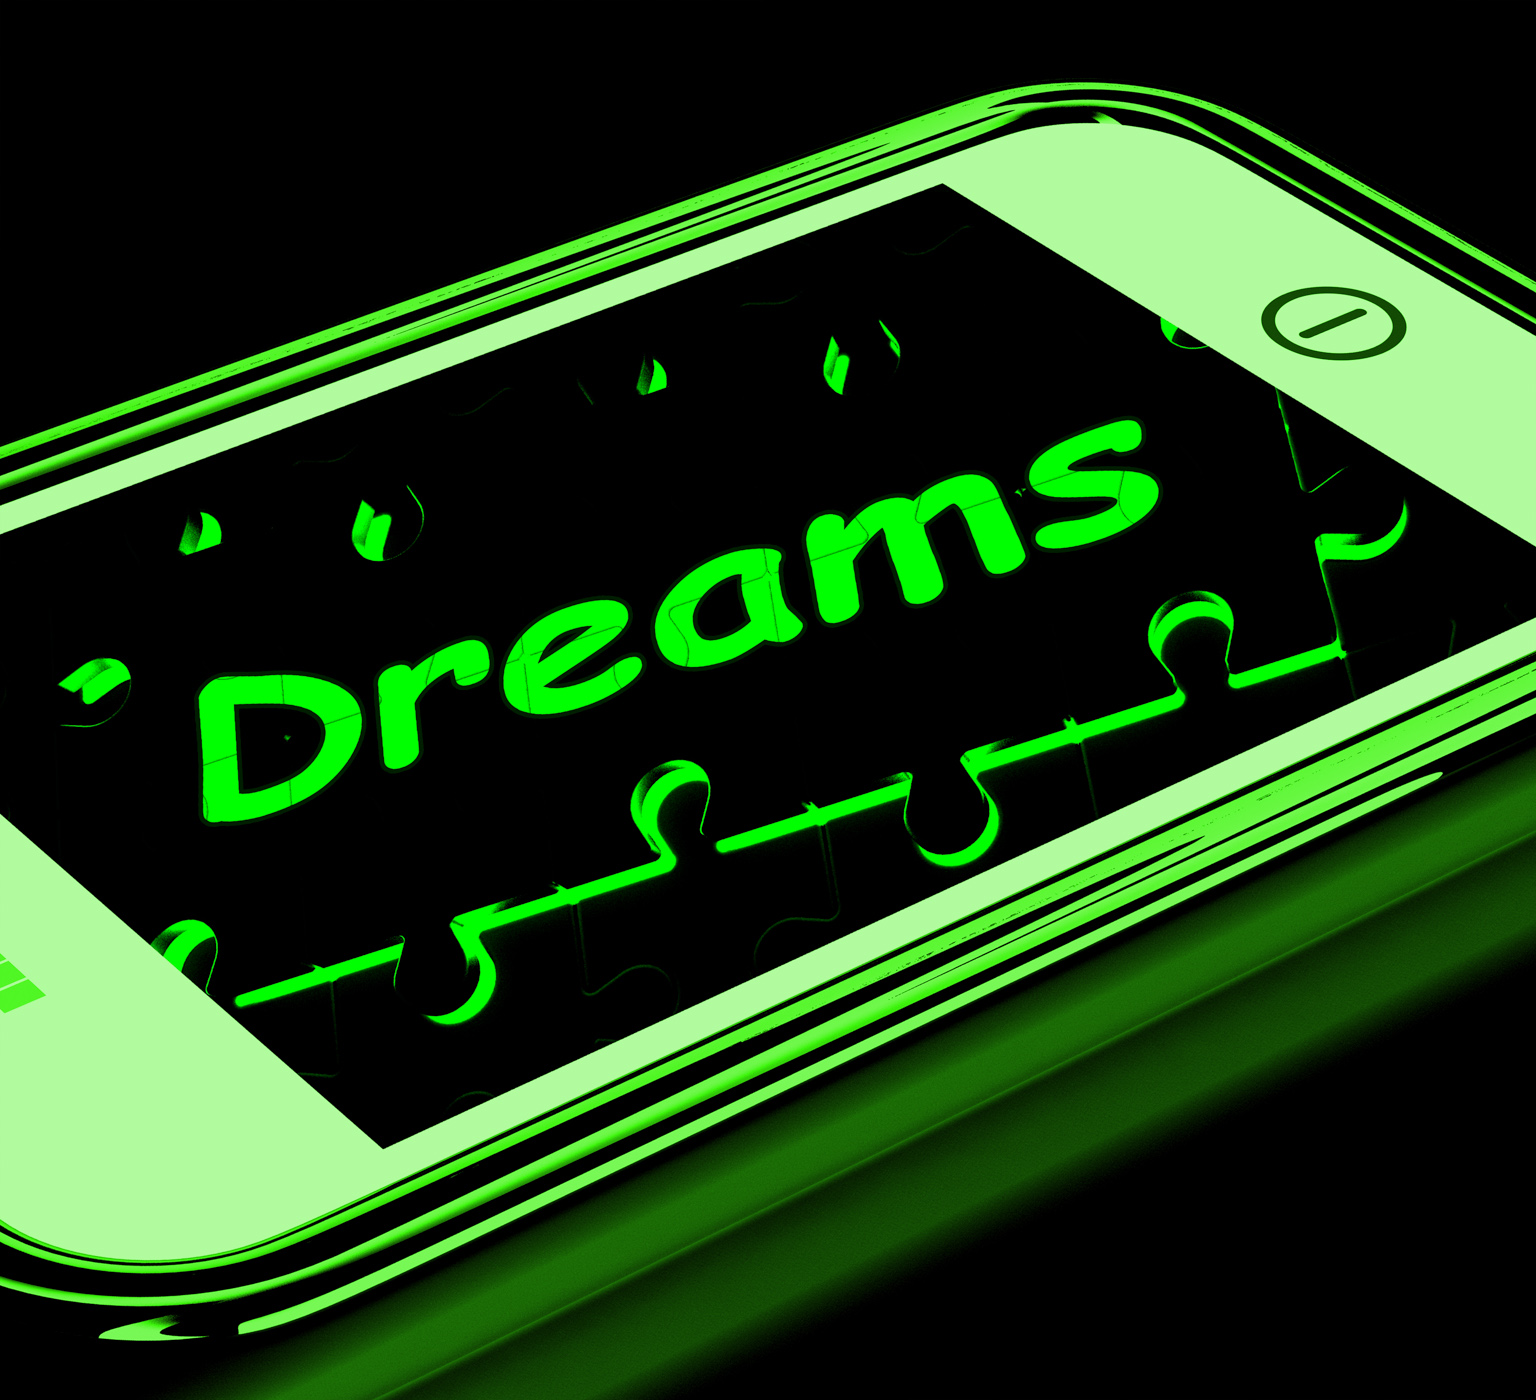 Dreams on smartphone shows aspirations photo